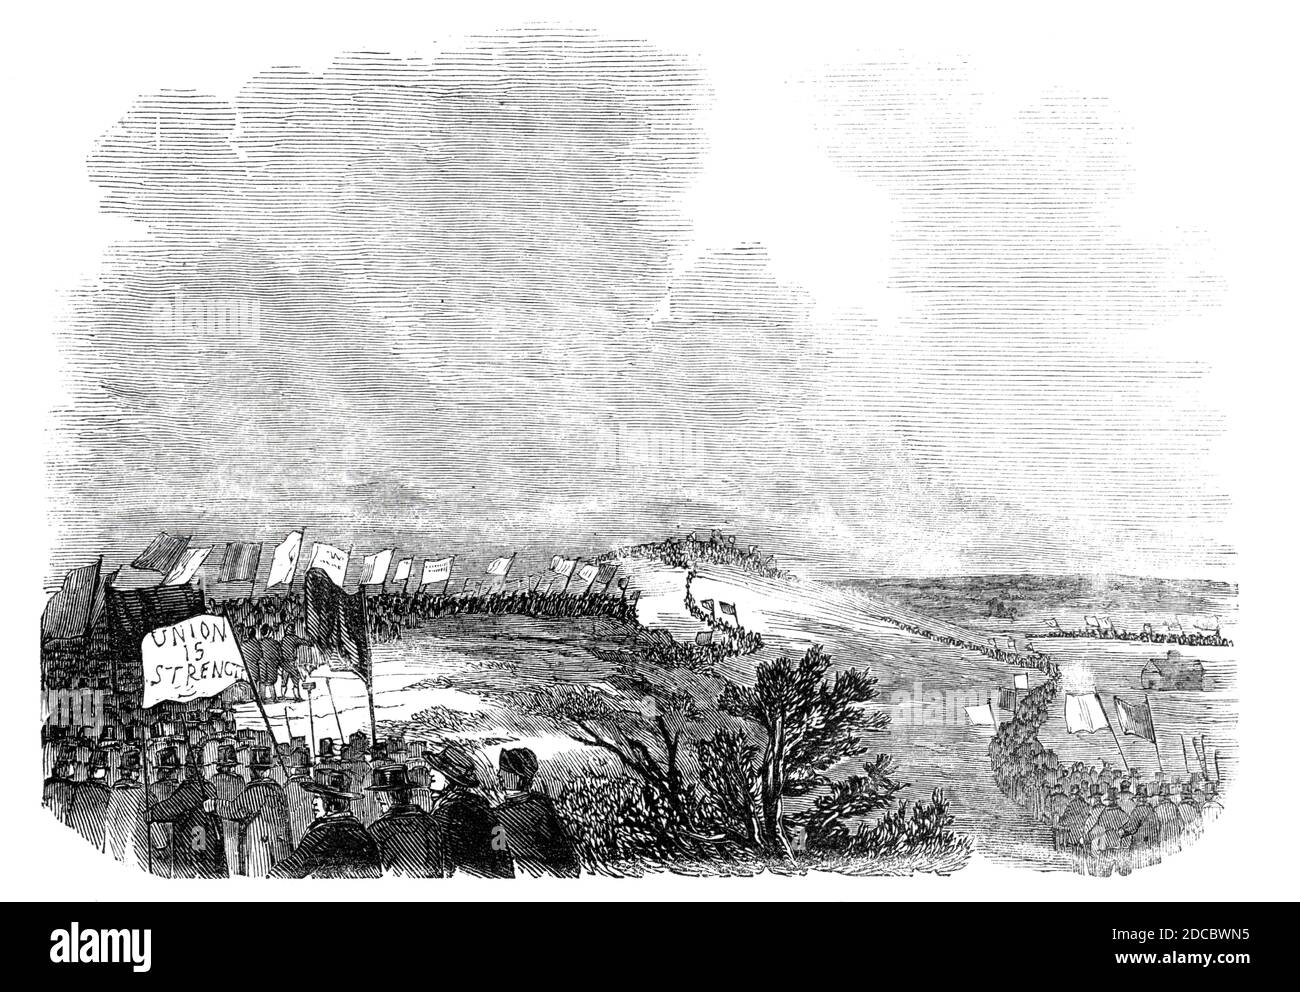 Meeting of pitmen, on Pittington Hill, 1844. Procession of miners in County Durham. 'An unfortunate difference at present exists between the pitmen and the coal owners, as the readers of the &quot;Illustrated London News&quot; will have perceived stated in former columns, which has led to an extensive strike. For some time the men have been making preparations for this movement, by an organised union, embracing the whole body of miners in England, Scotland, and Wales and engaged a solicitor, whom they term their &quot;Attorney-General,&quot; to conduct and advise in their affairs'. From &quot; Stock Photo